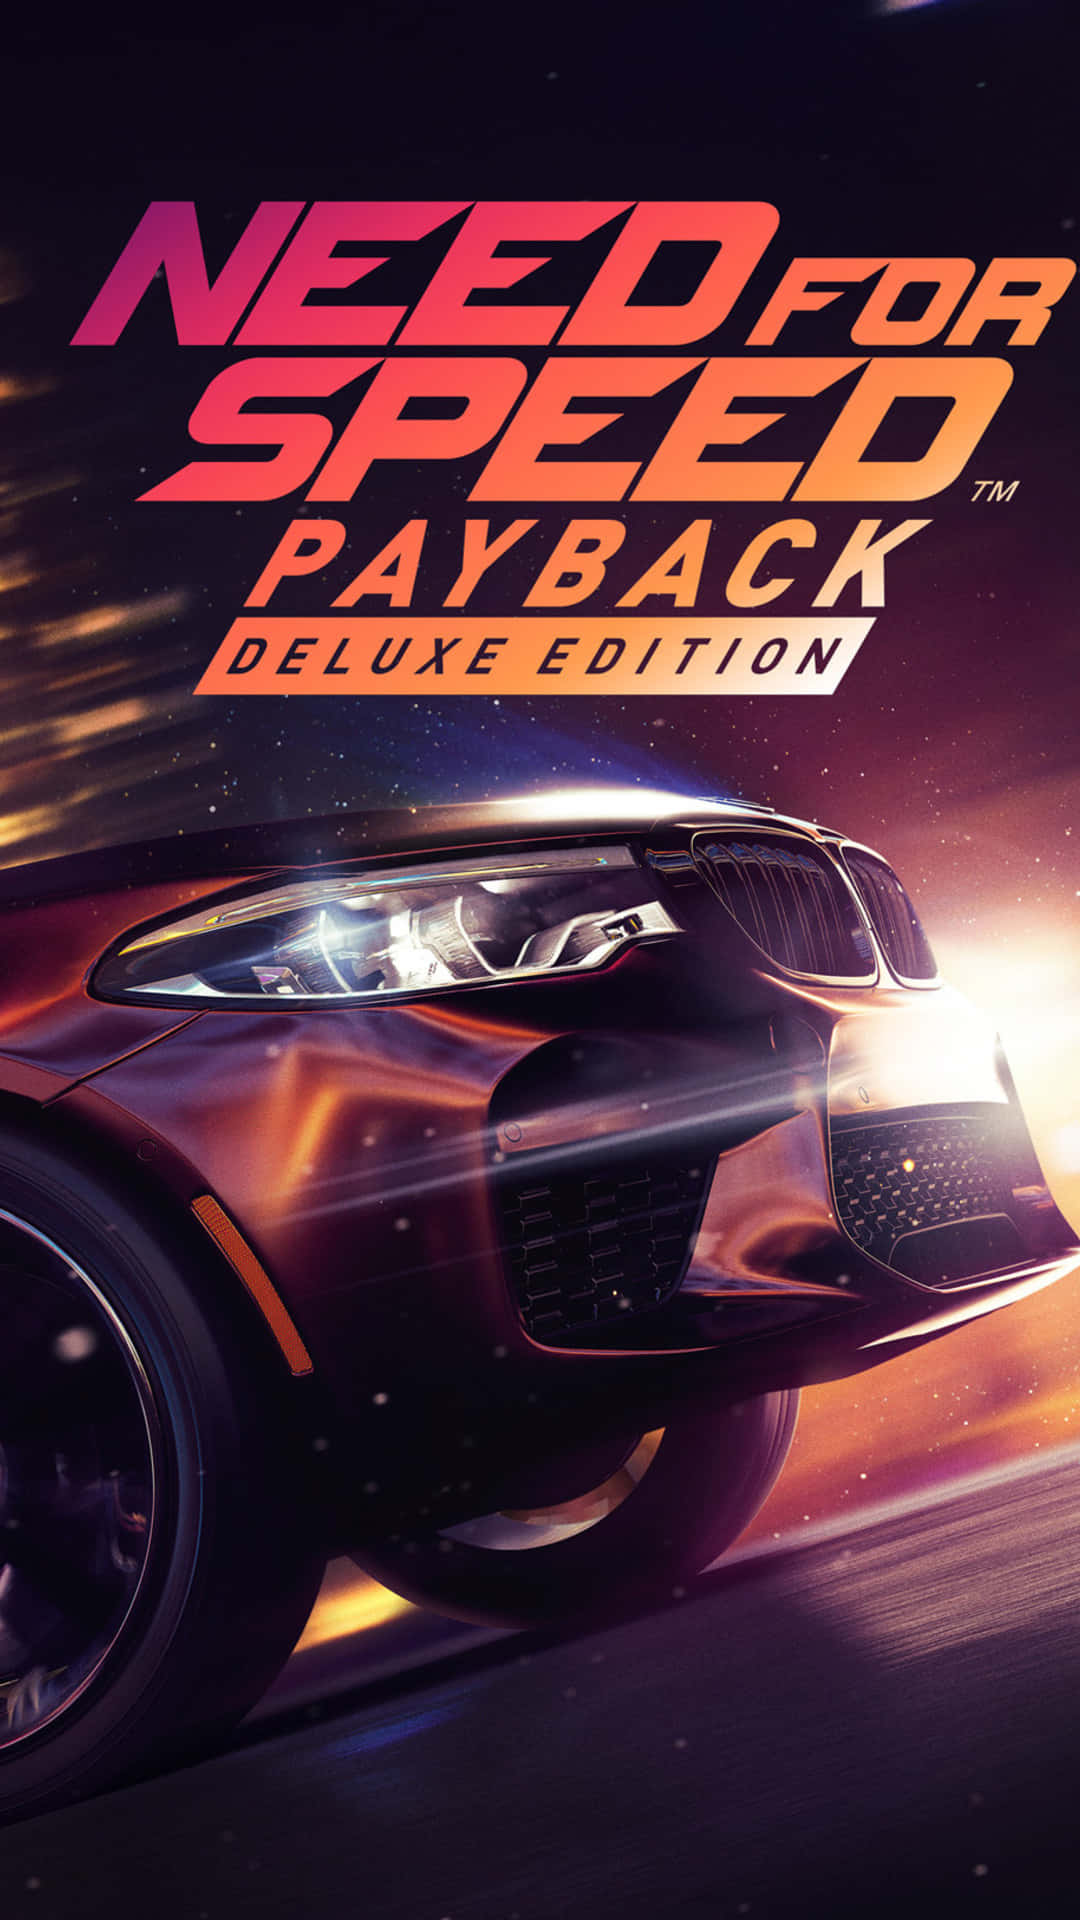 Pixel 3 Need For Speed Payback Background Deluxe Edition Cover